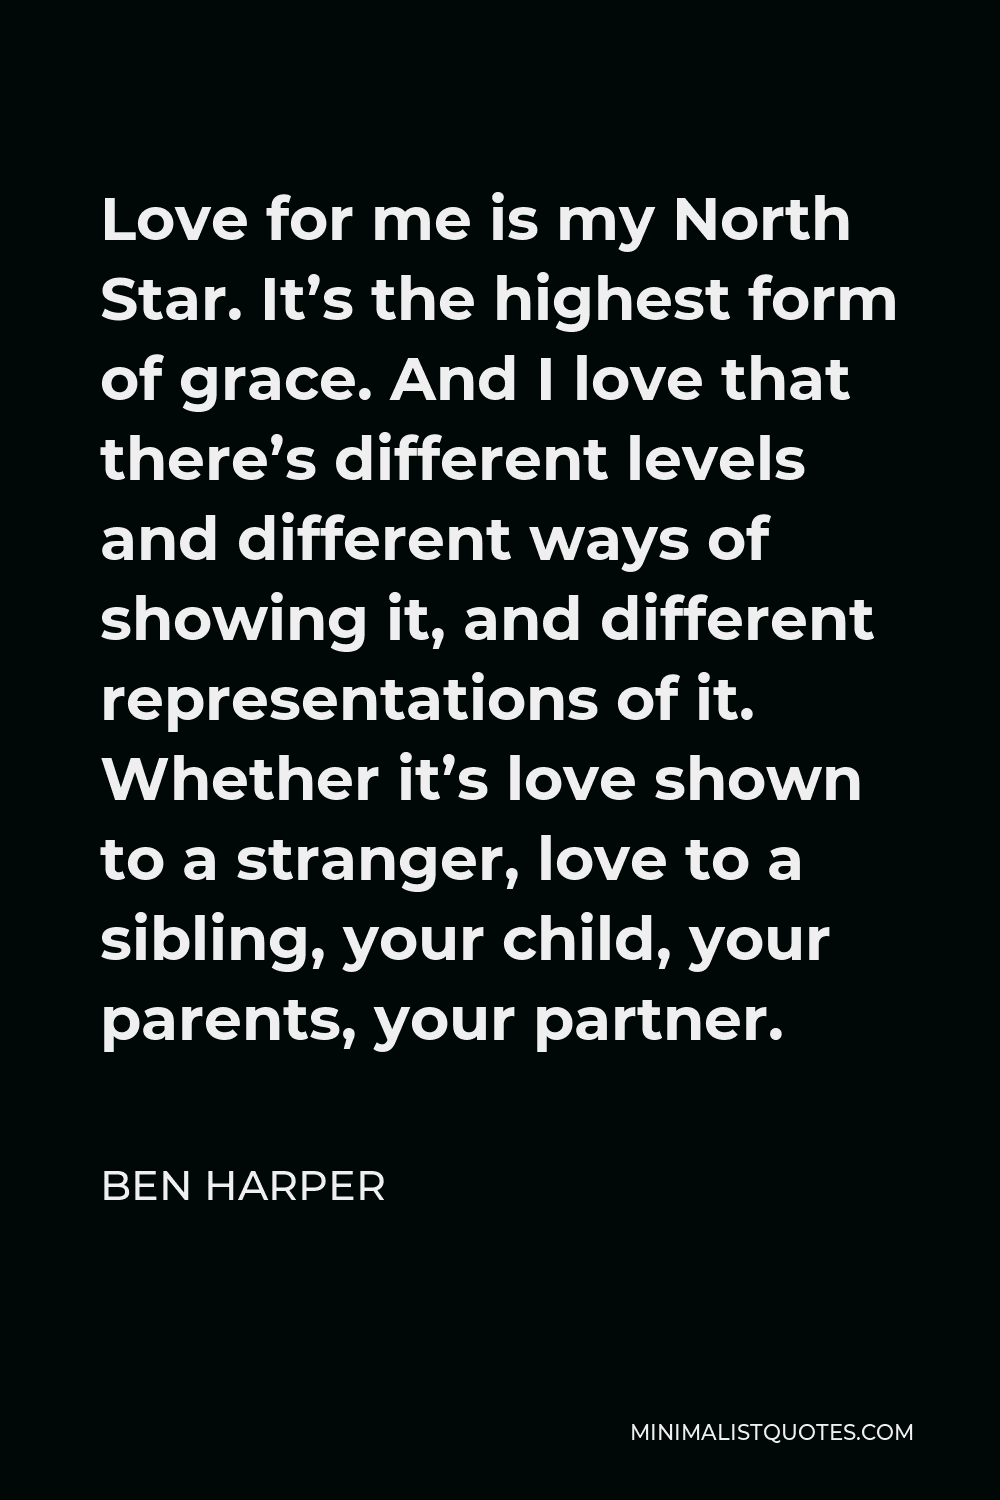 Ben Harper Quote - Love for me is my North Star. It’s the highest form of grace. And I love that there’s different levels and different ways of showing it, and different representations of it. Whether it’s love shown to a stranger, love to a sibling, your child, your parents, your partner.